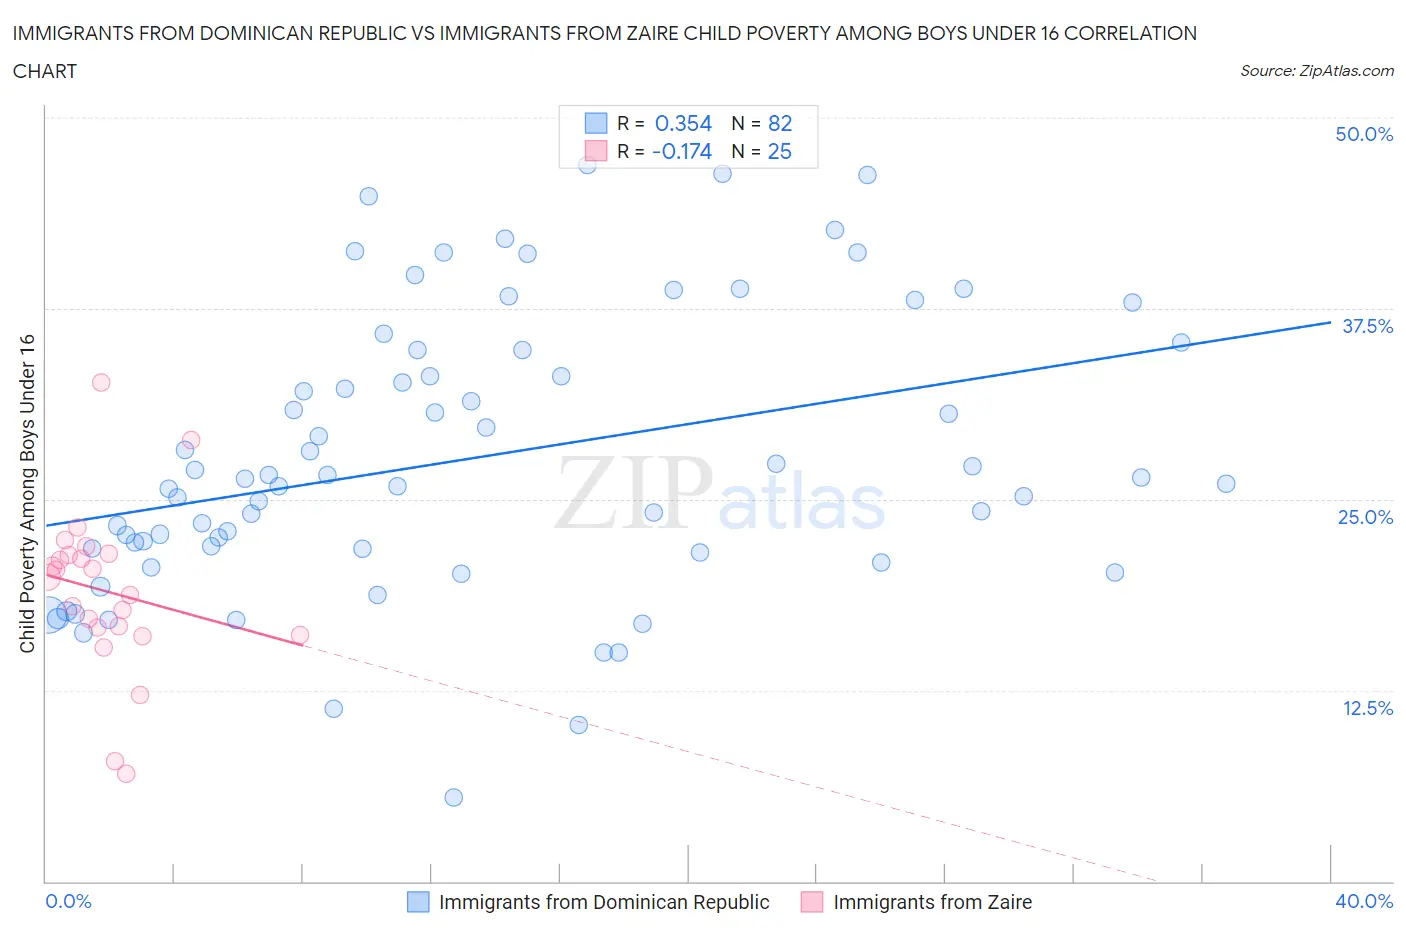 Immigrants from Dominican Republic vs Immigrants from Zaire Child Poverty Among Boys Under 16